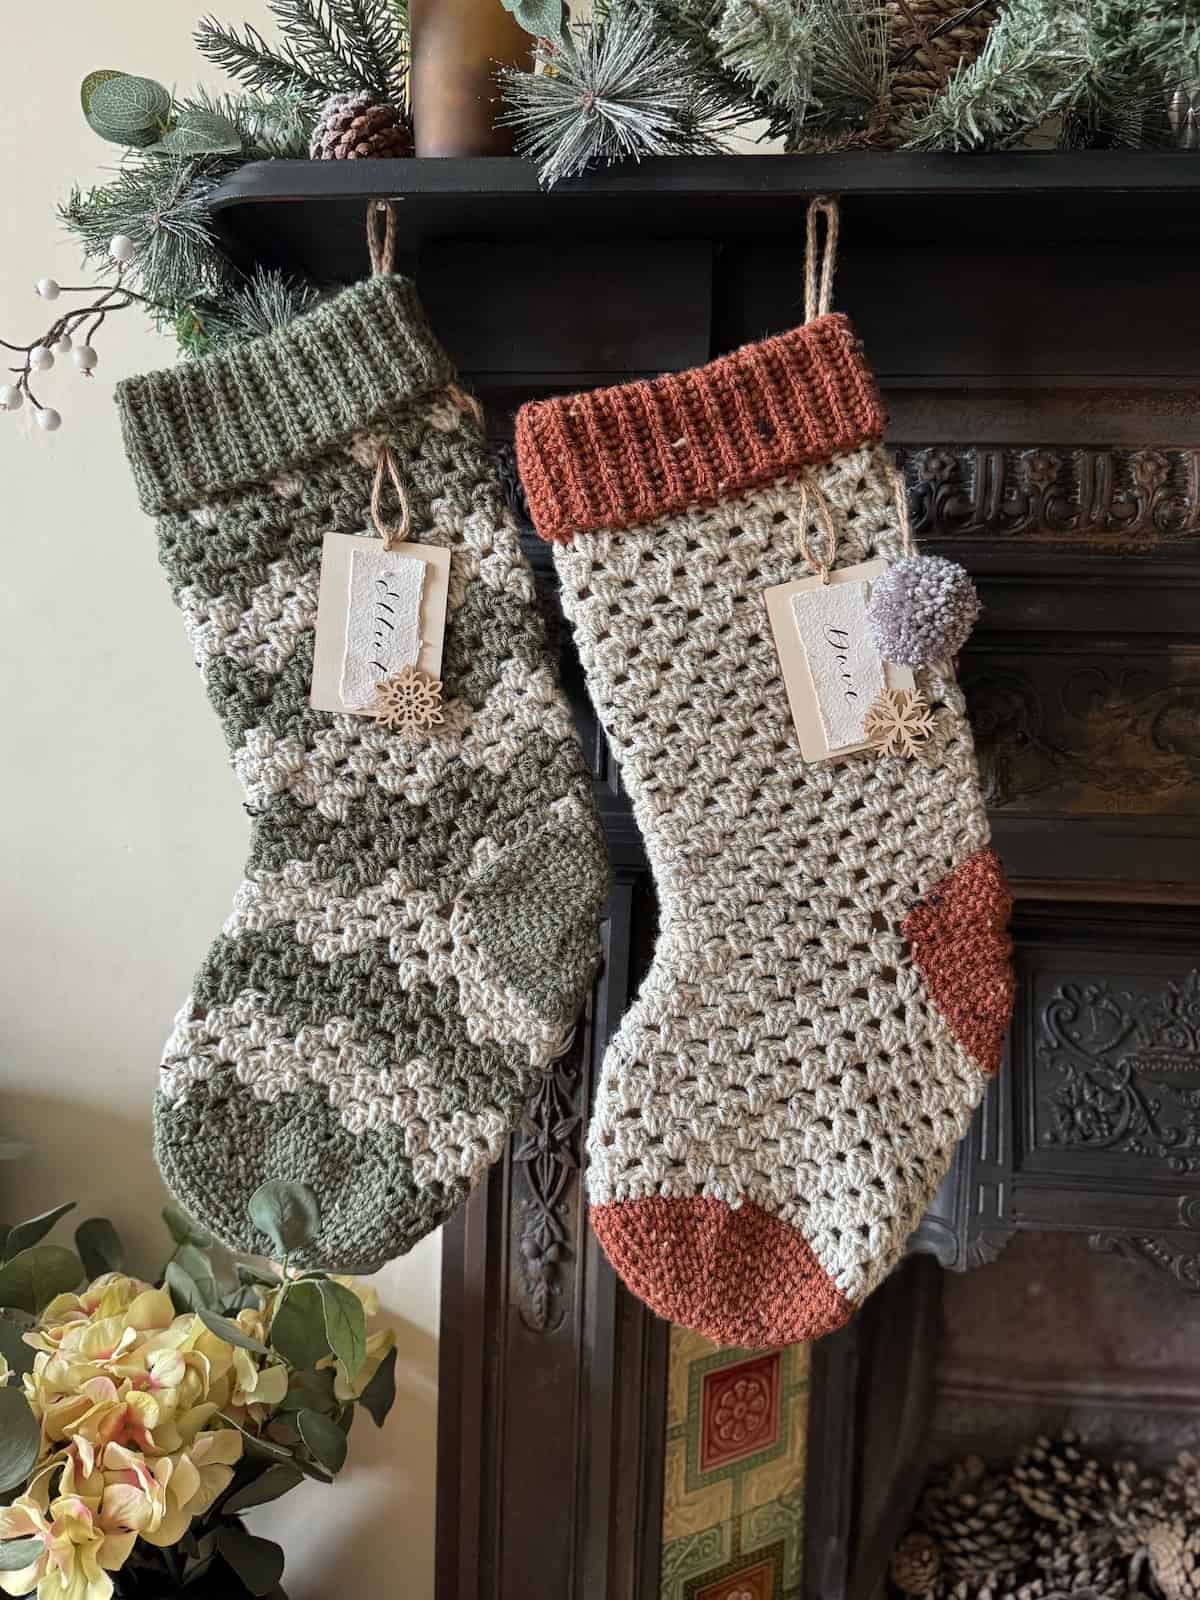 Two crochet Christmas stockings hanging on a fireplace.